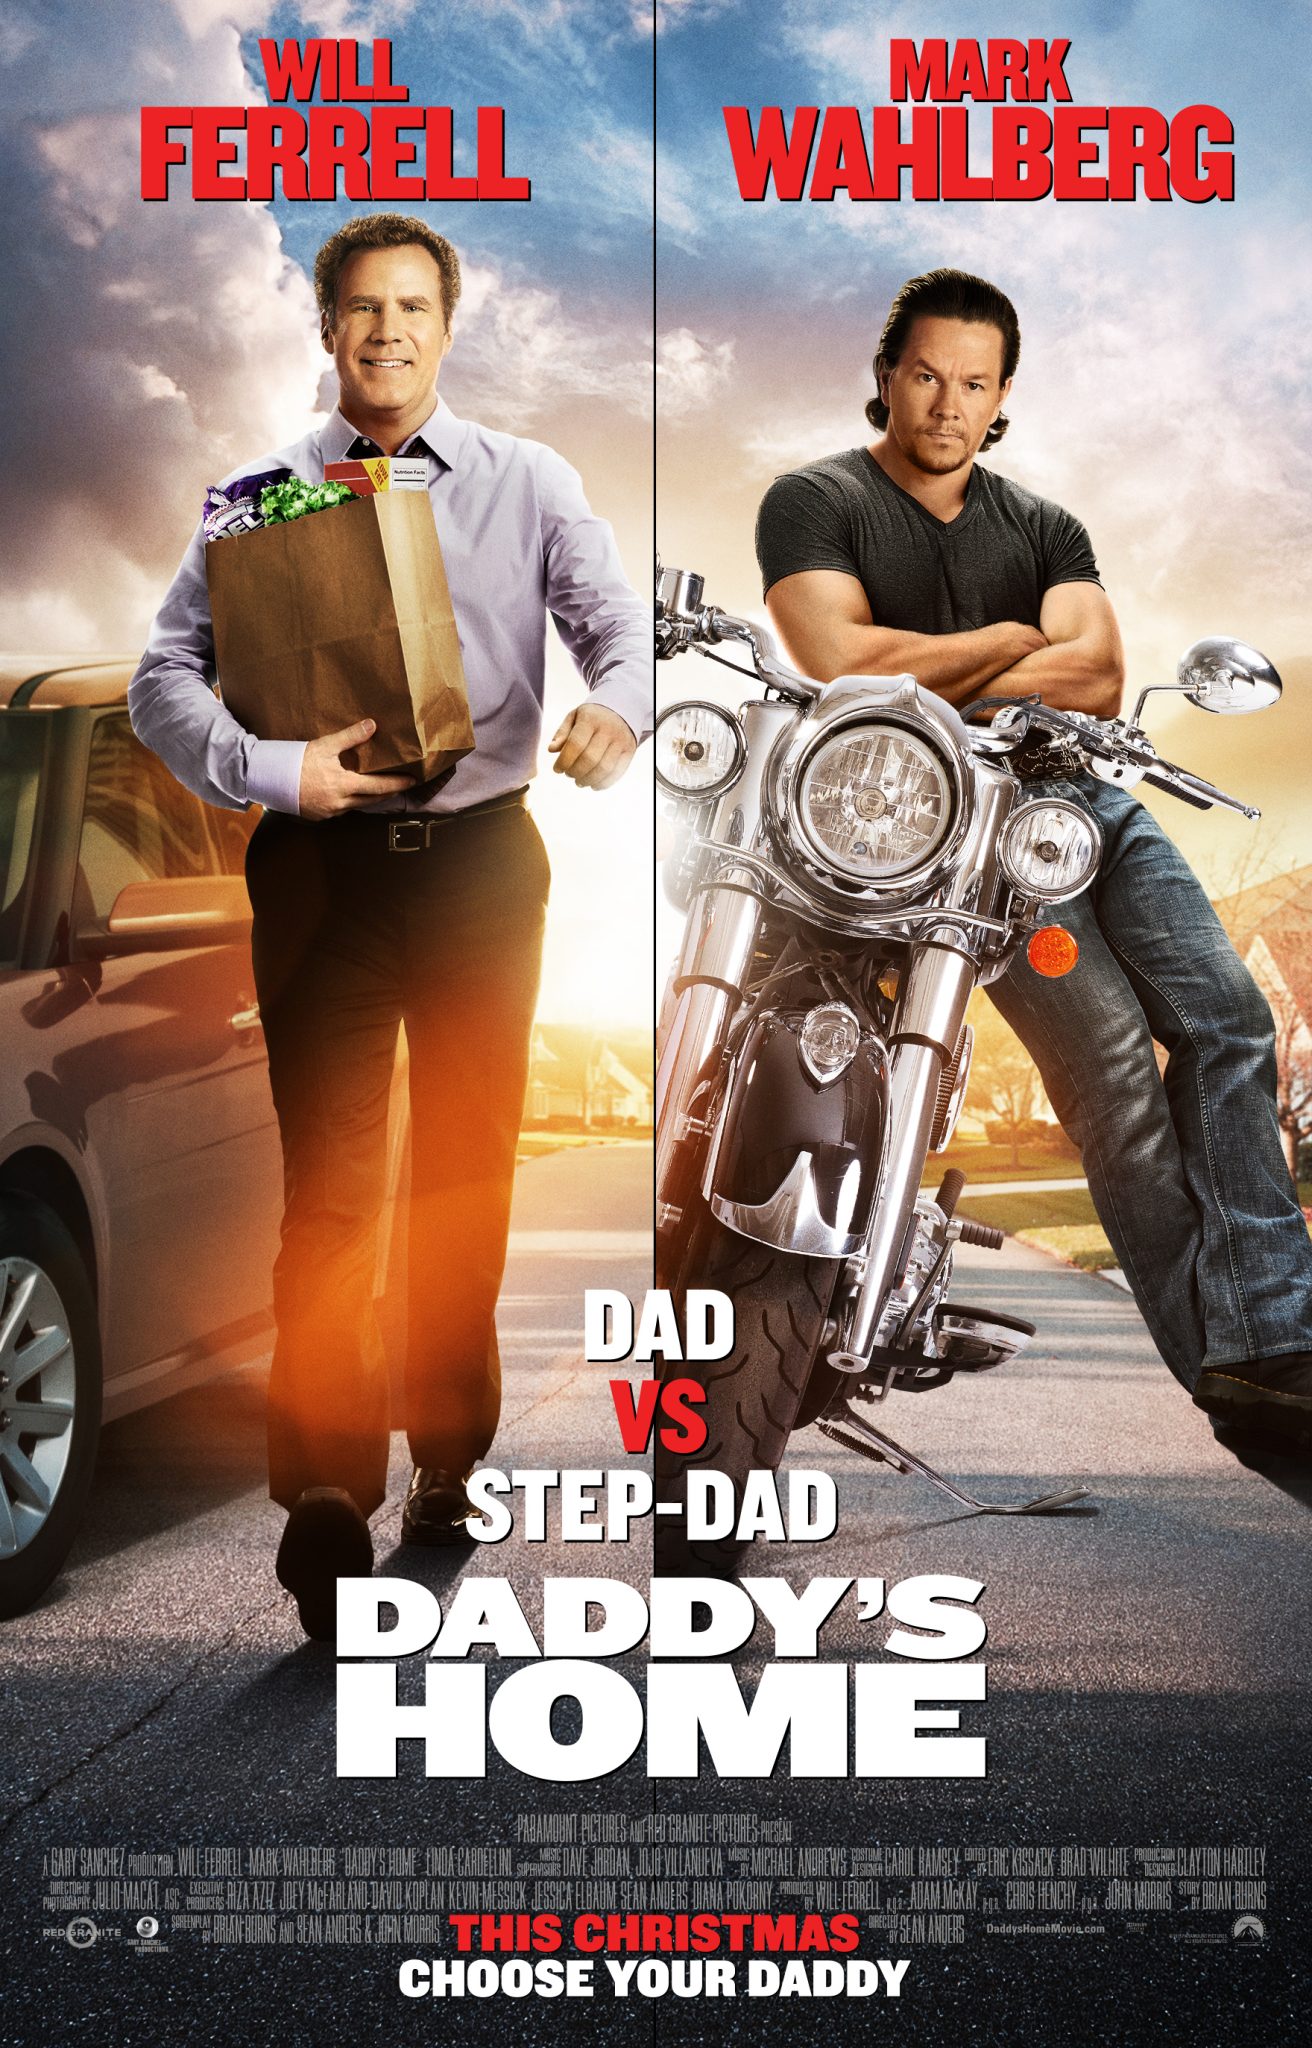 New Movie: Daddy’s Home Starring Will Ferrell & Mark Wahlberg